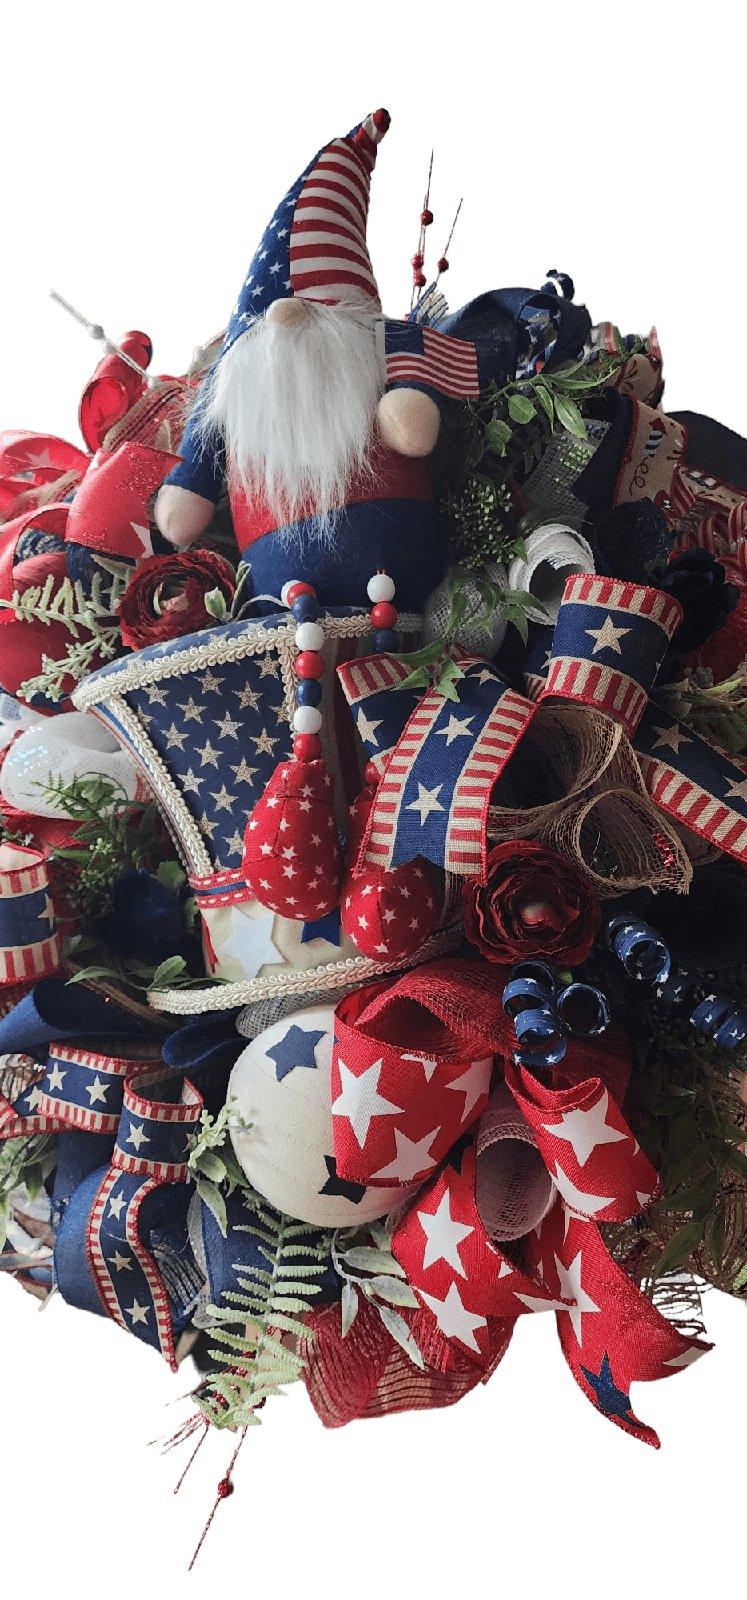 Patriotic Wreath with Uncle Sam Hat and USA Gnome for 4th of July Decor - RusticFarmhouseDecor